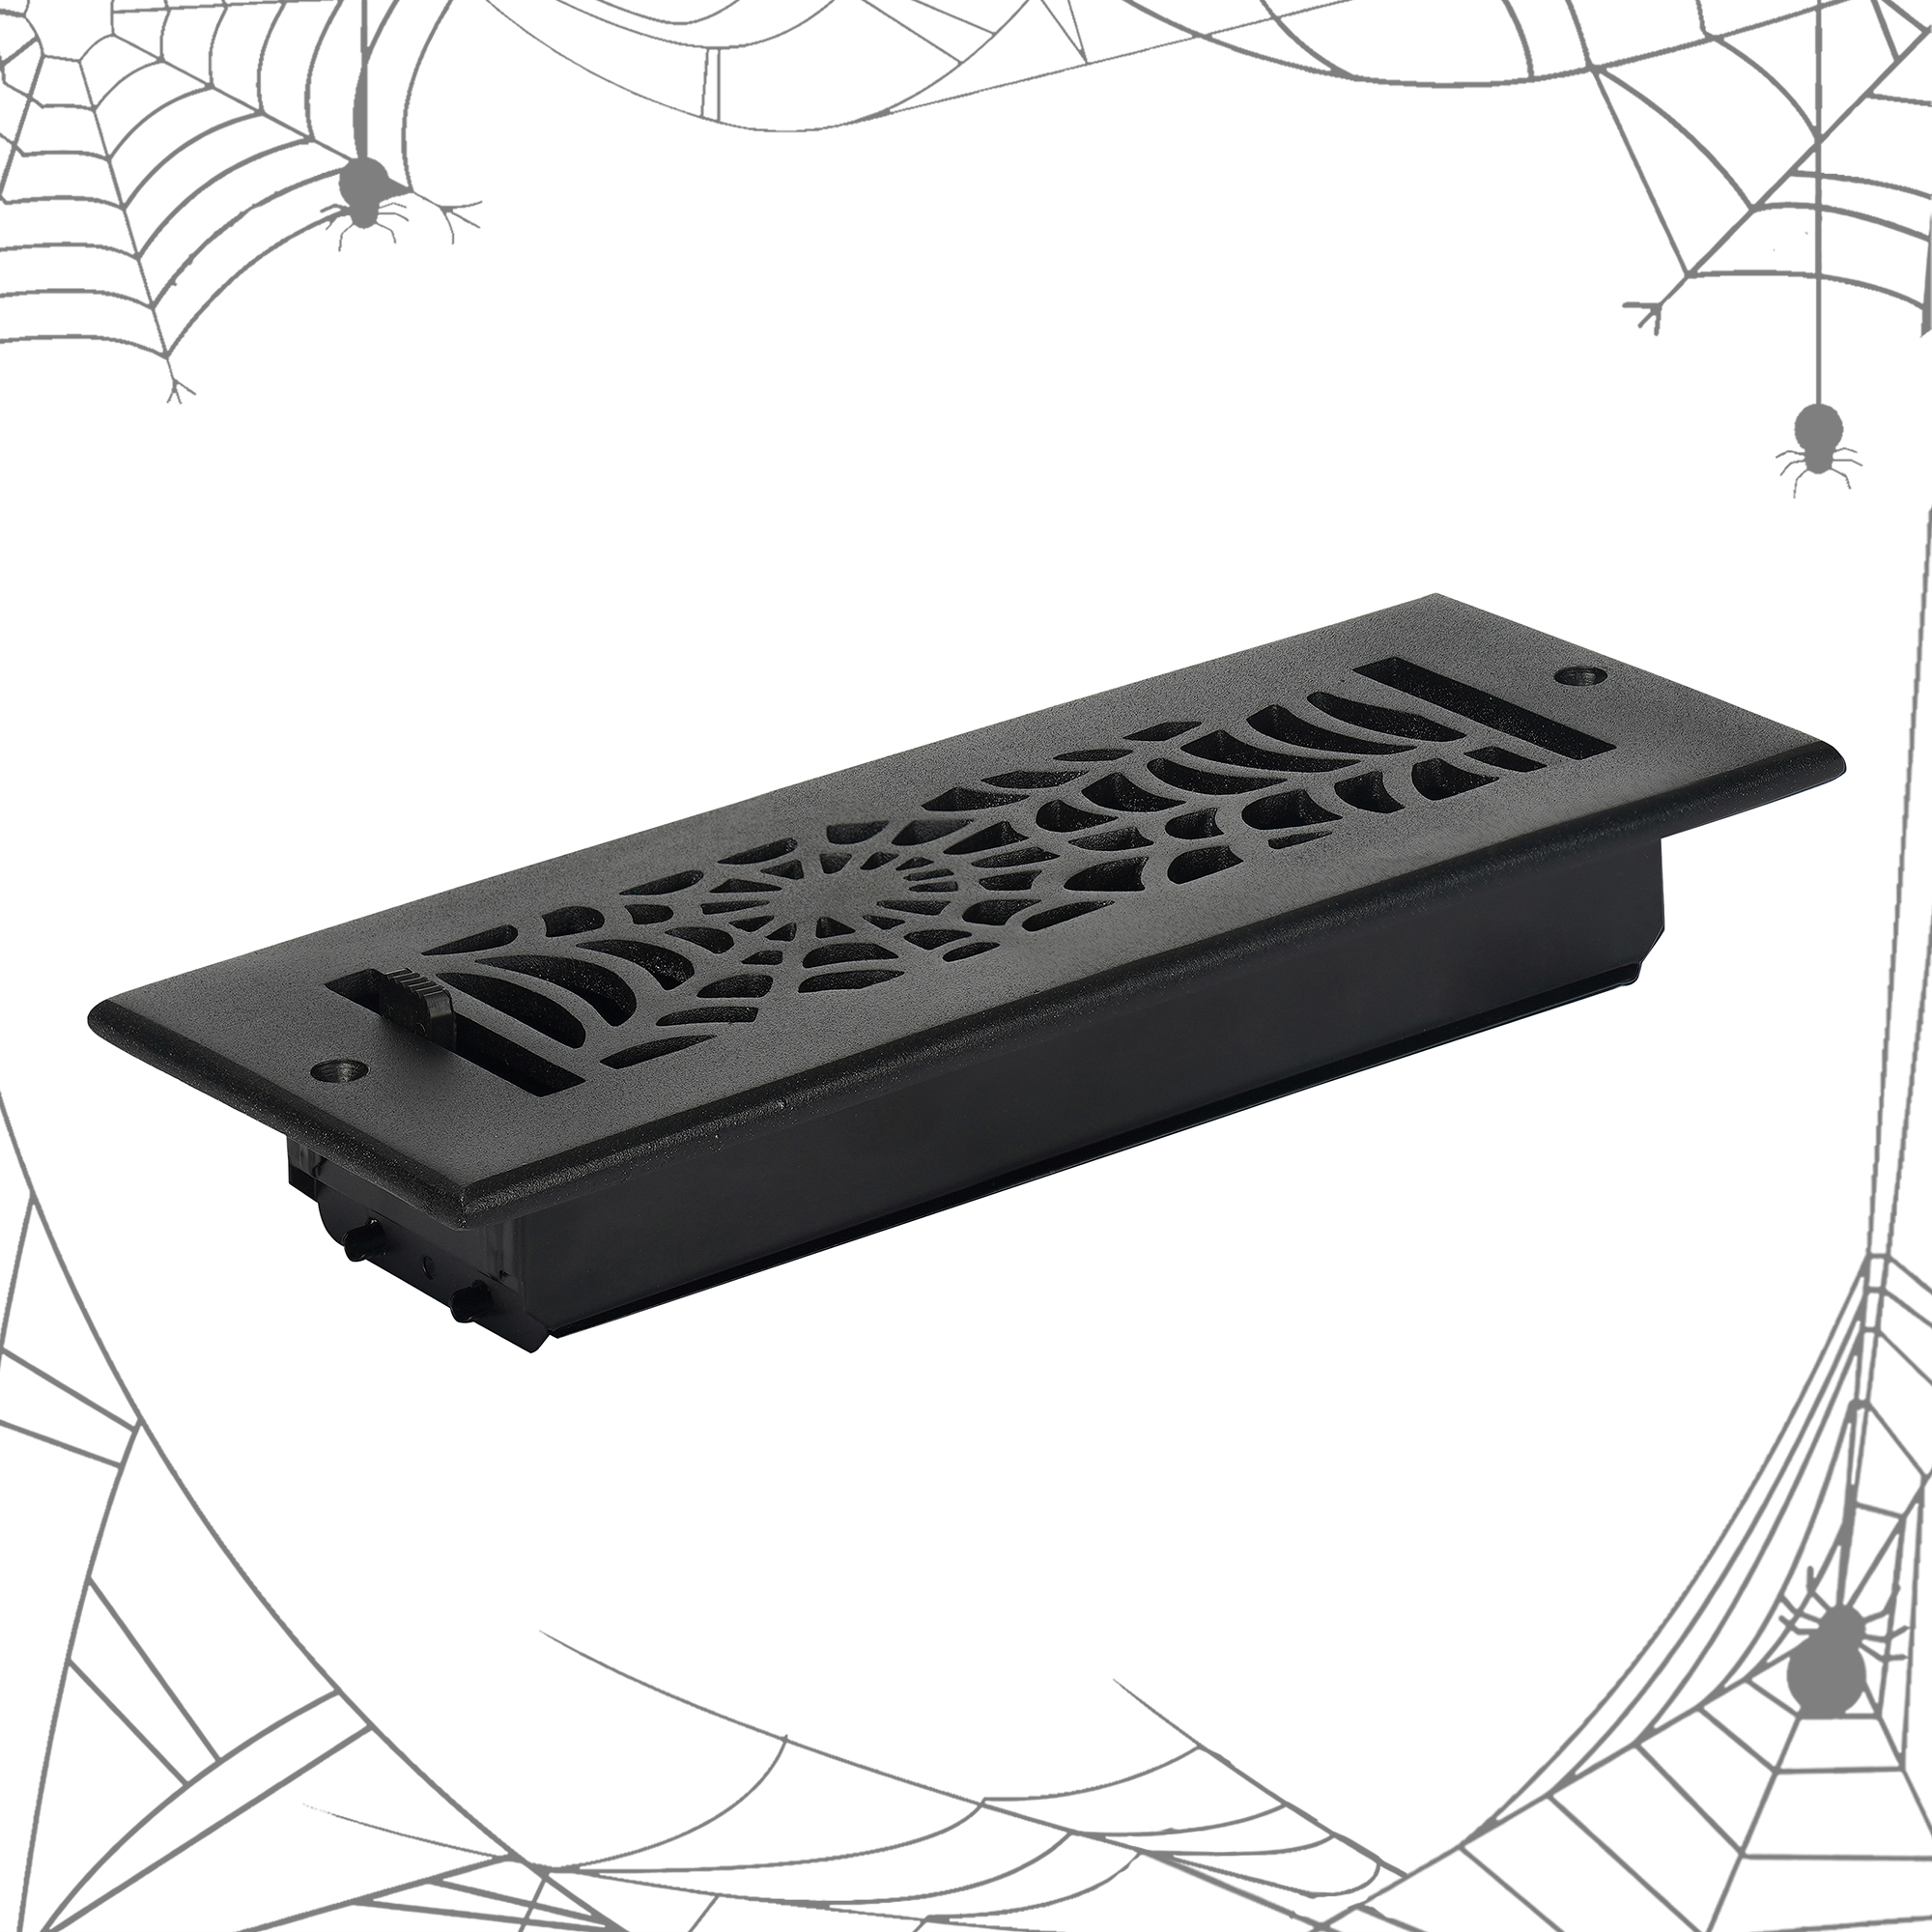 Spooky Gothic 3"x10"Solid Cast Aluminum louvered Air Supply |Powder Coated